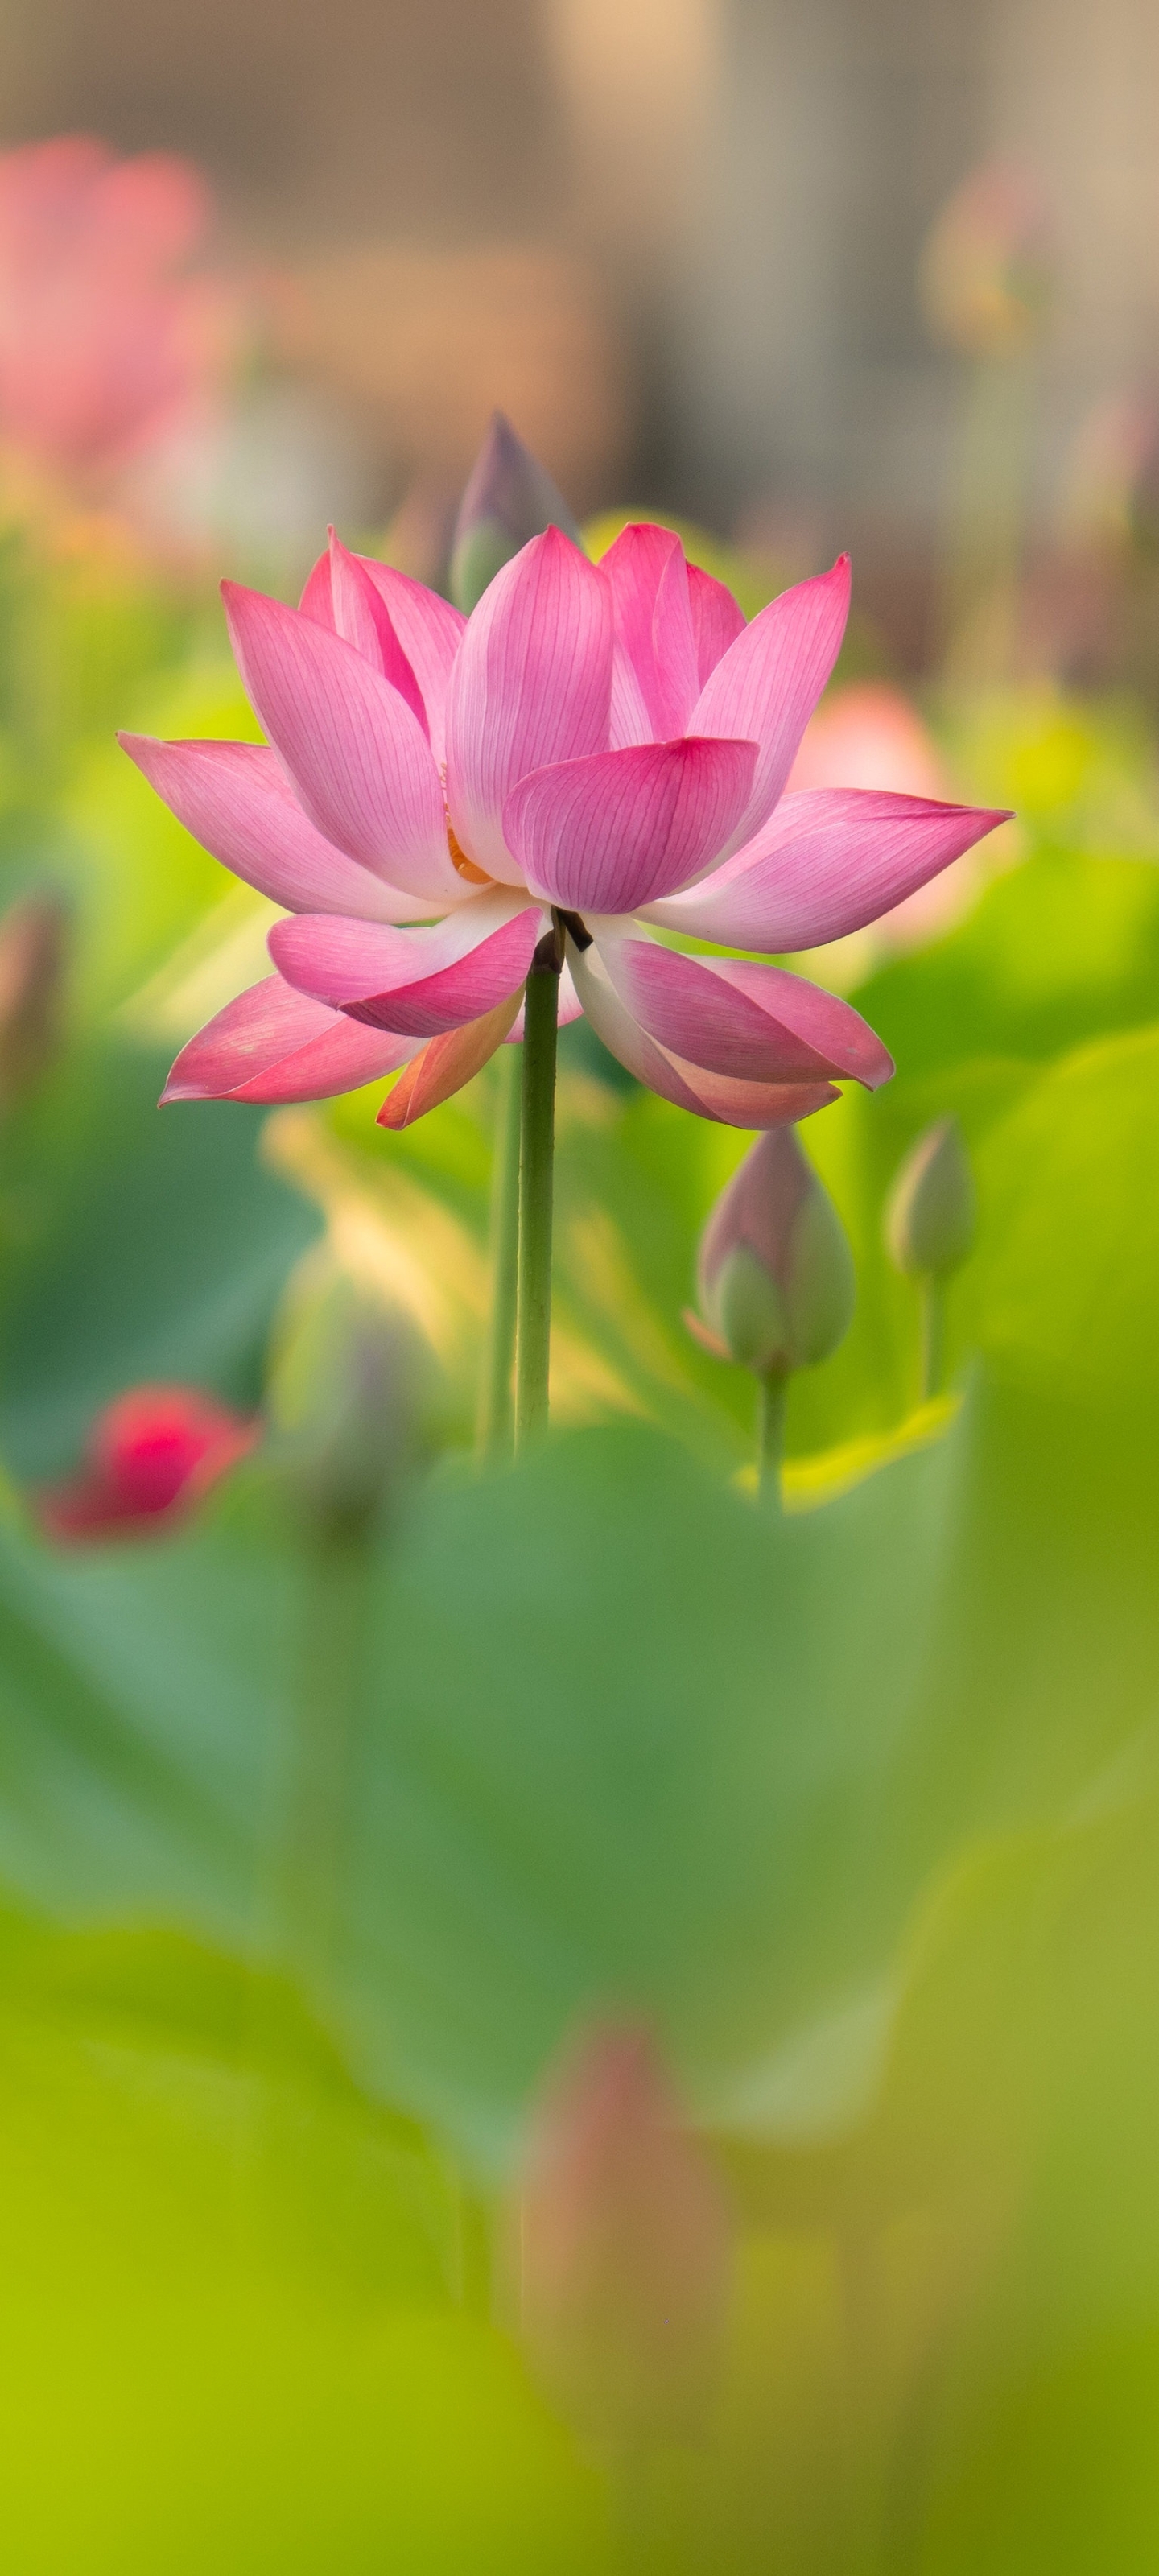 4K Lotus Wallpaper HD:Amazon.ca:Appstore for Android